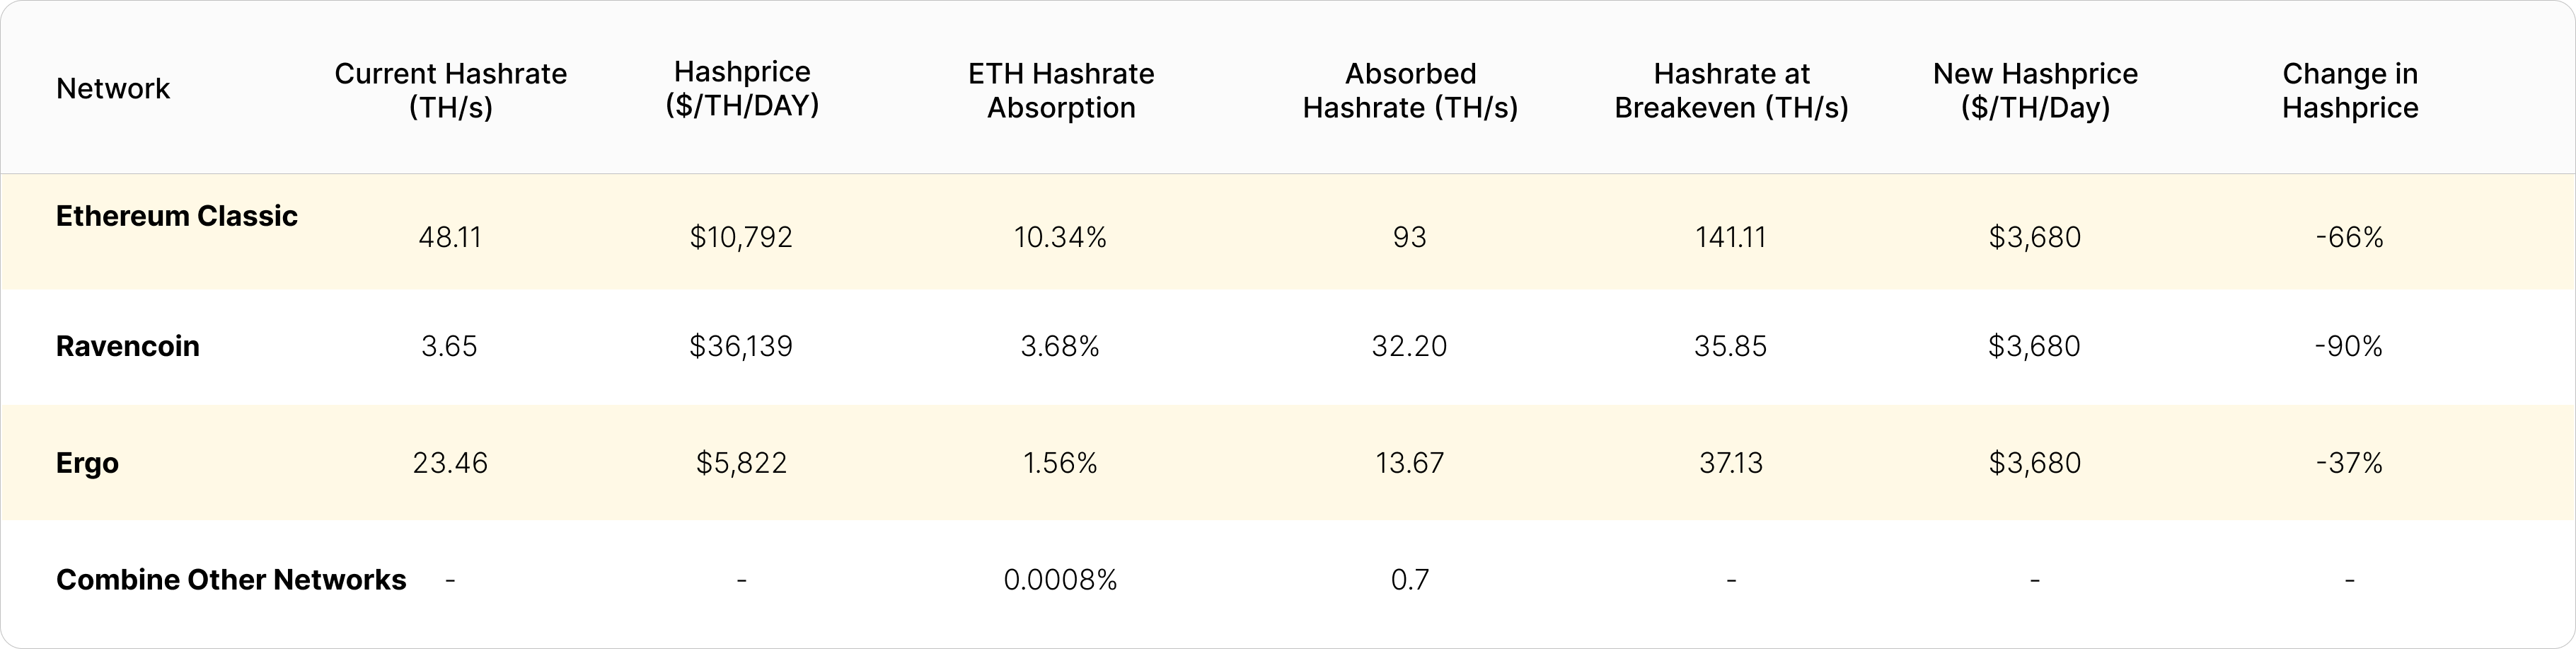 Analysis of how much ETH hashrate Ethereum Classic, Ravencoin, and Ergo could absorb before miners running 2.55 J/MH hardware at $0.06/kWh reach a gross profit threshold of $0 | Source: Luxor business data, 2Miners